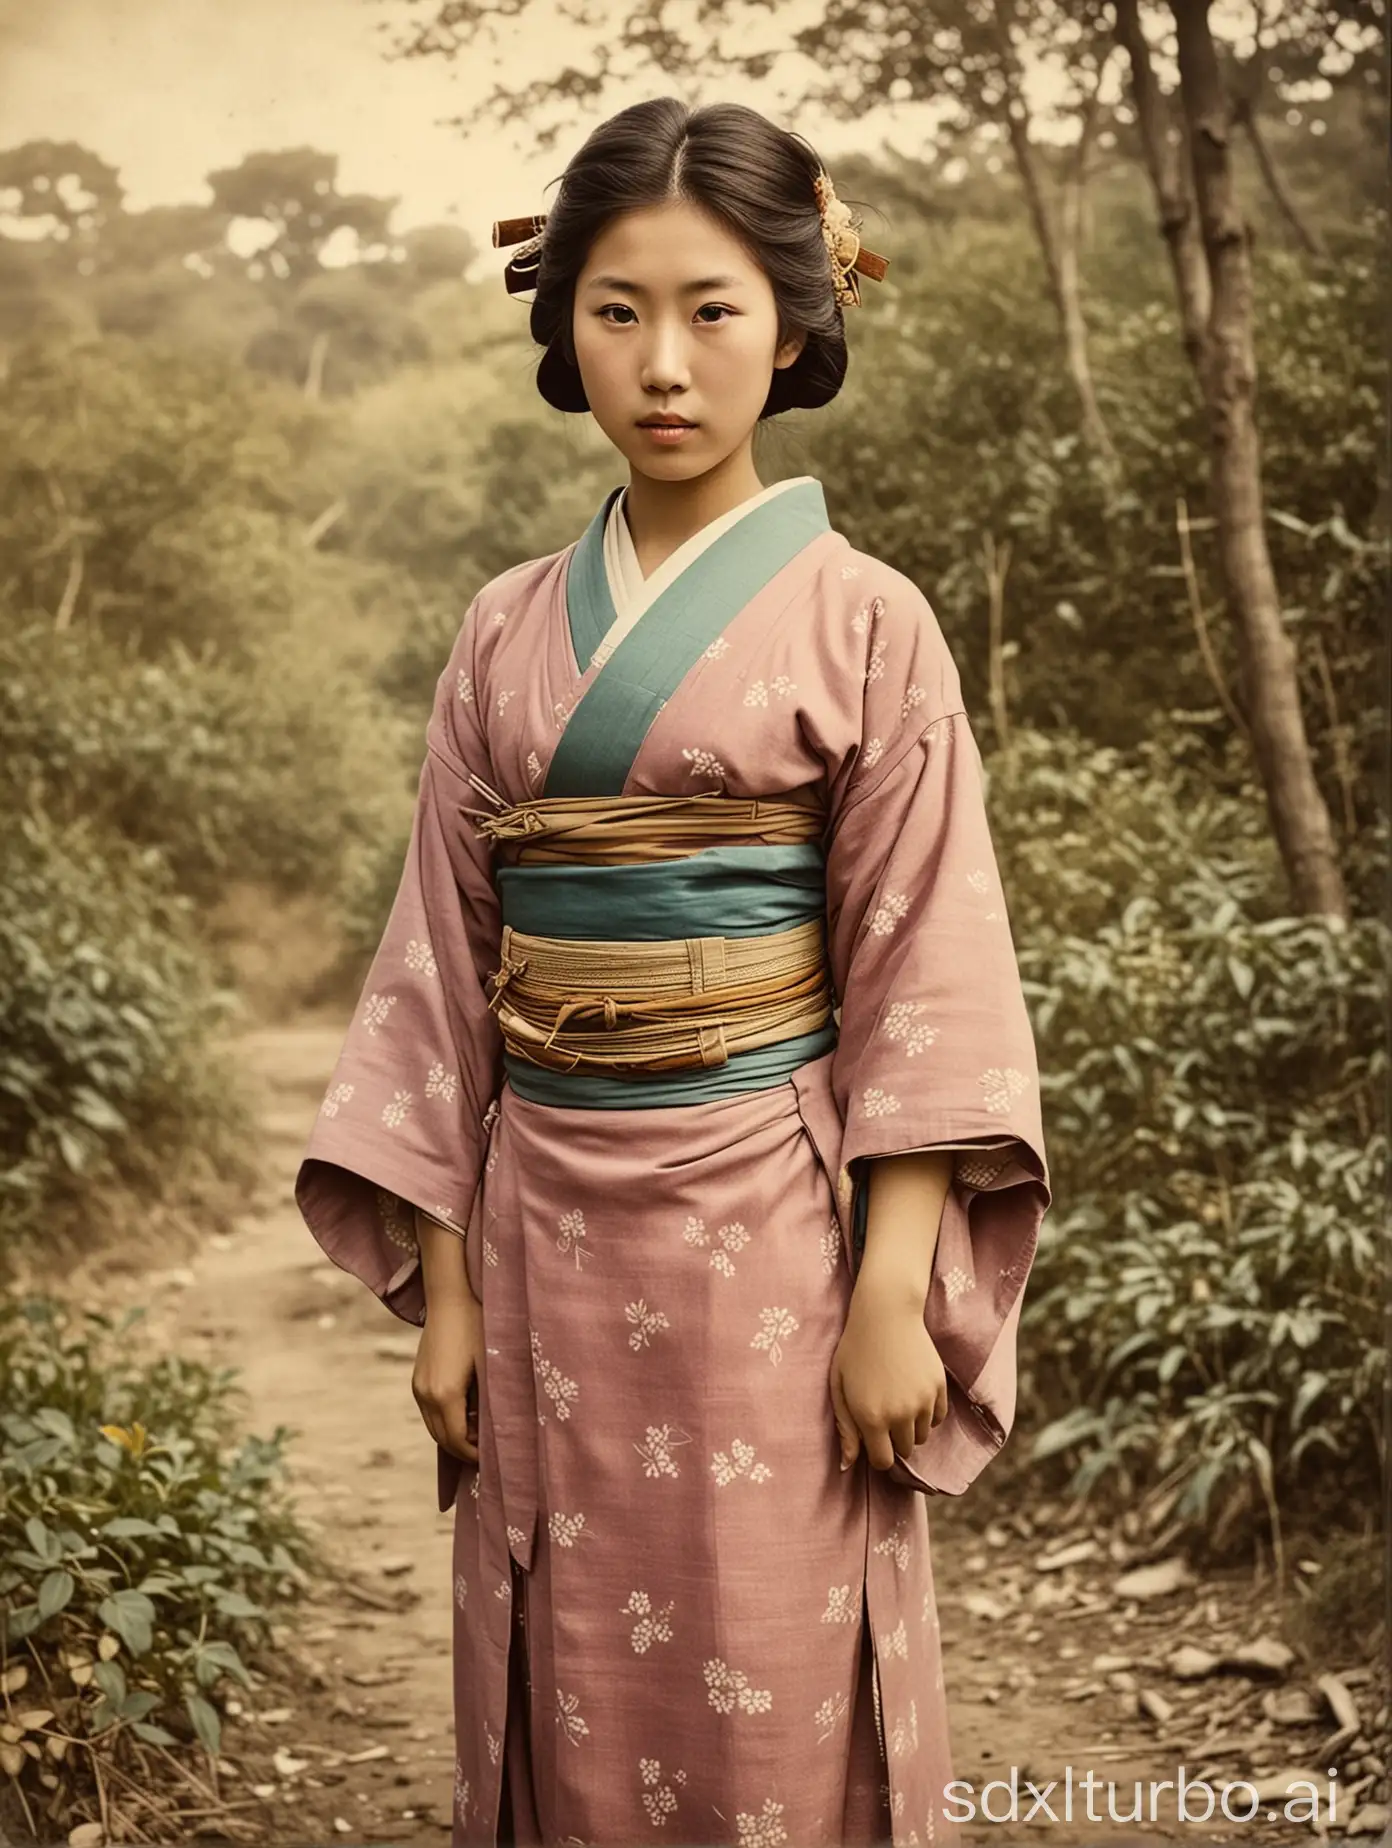 vintage photograph of a rural Japanese girl, circa 1867, colorized